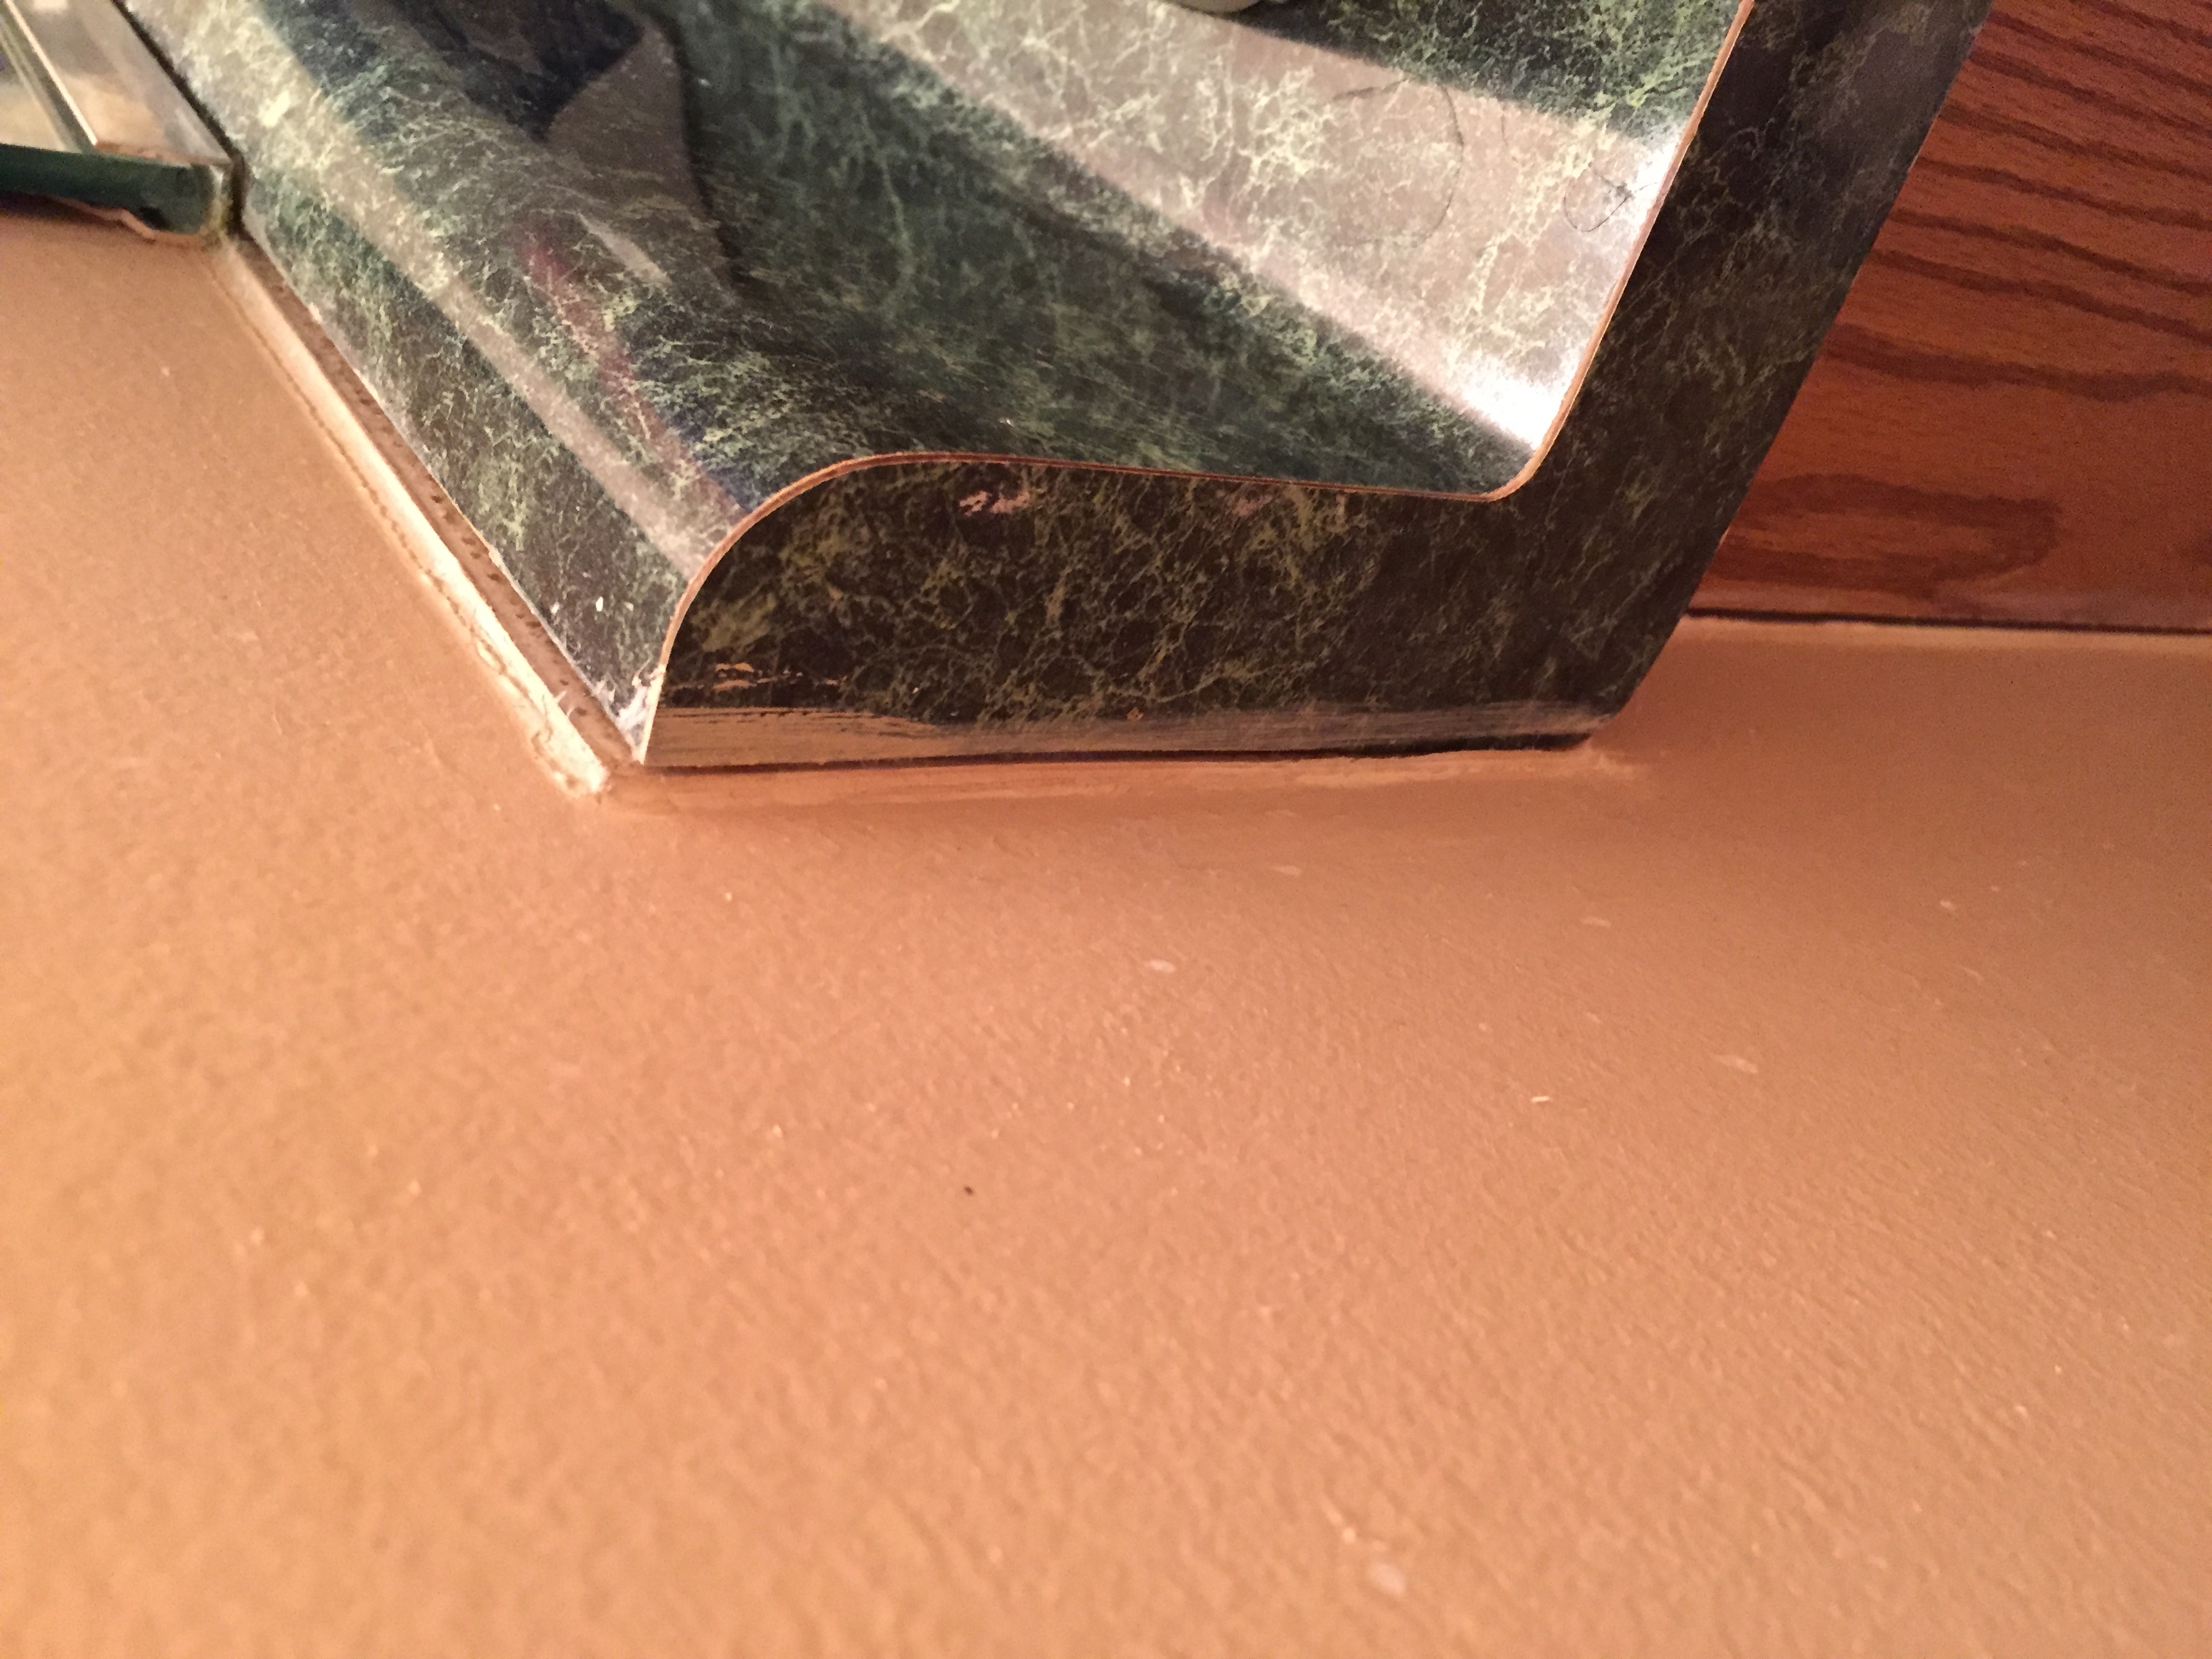 Seperation of master bath countertop from wall